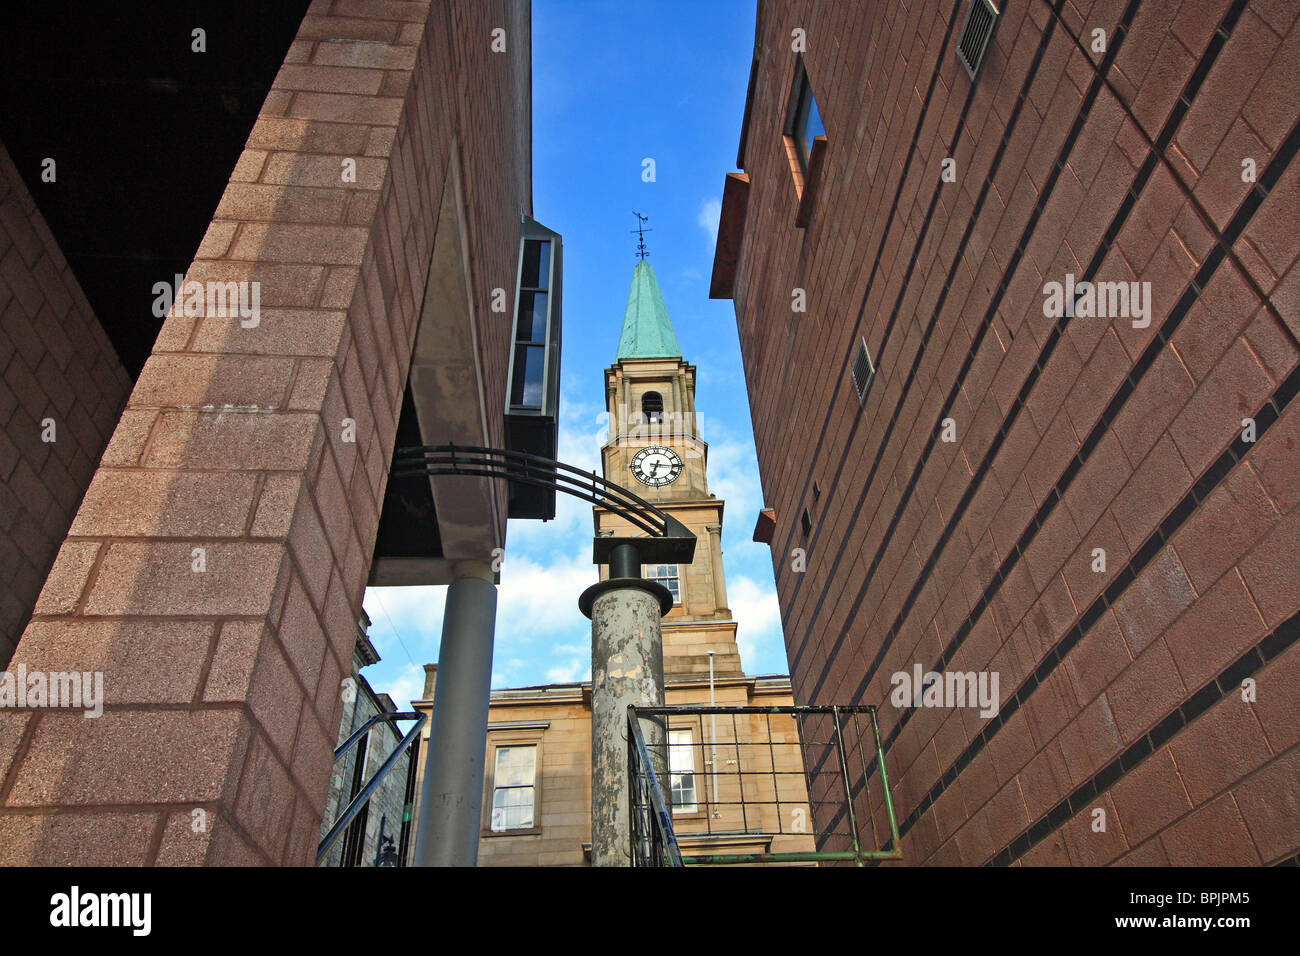 Town clock in Airdrie, a small town in Scotland Stock Photo